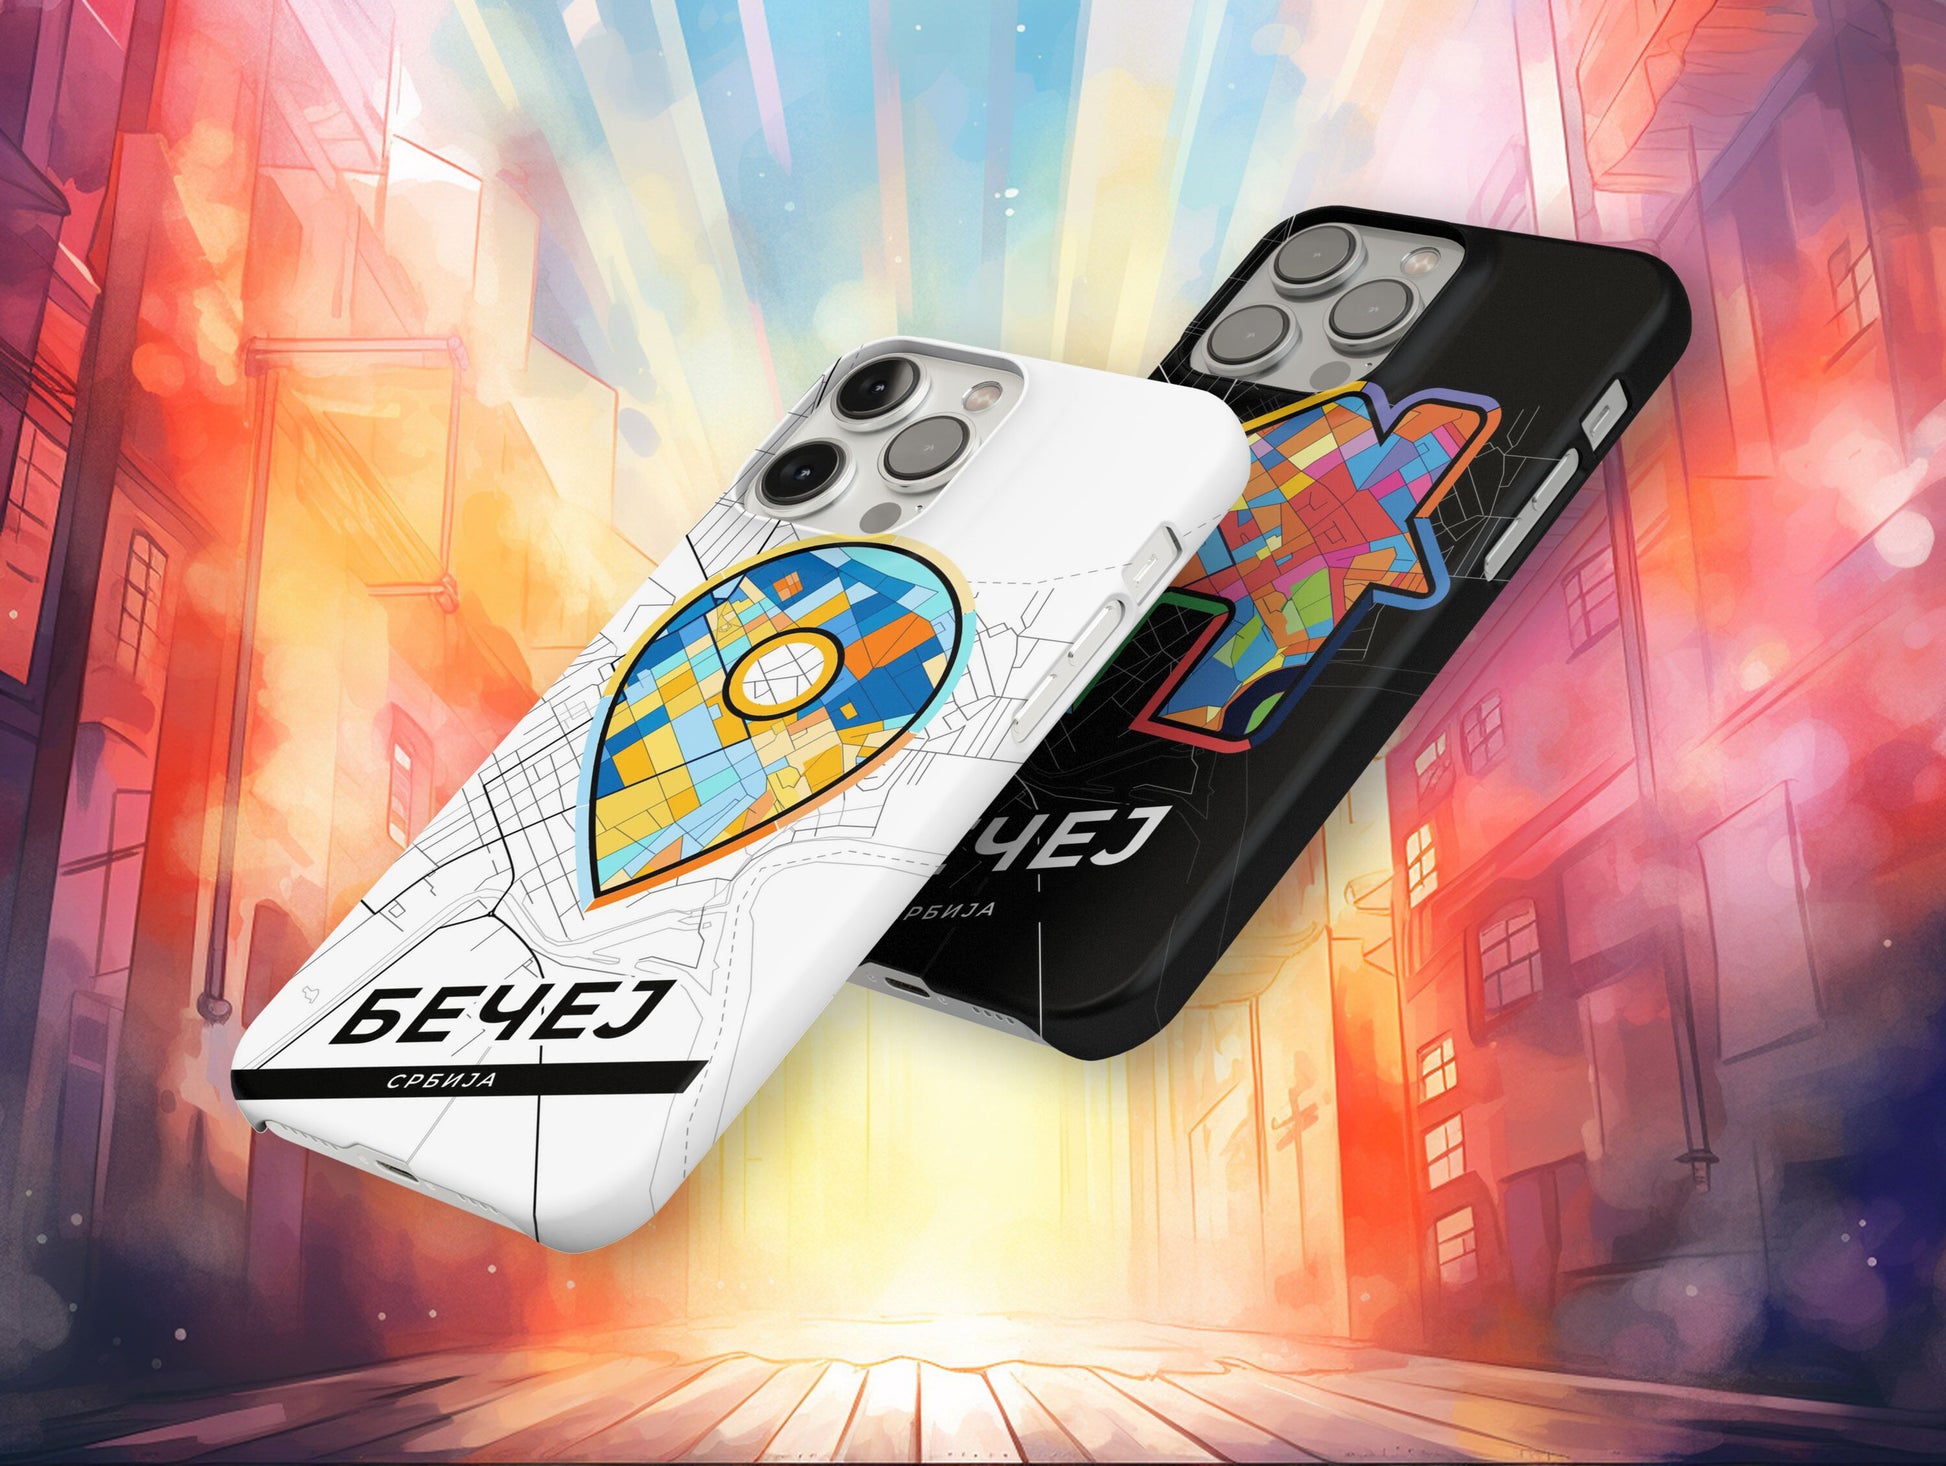 Bečej Serbia slim phone case with colorful icon. Birthday, wedding or housewarming gift. Couple match cases.